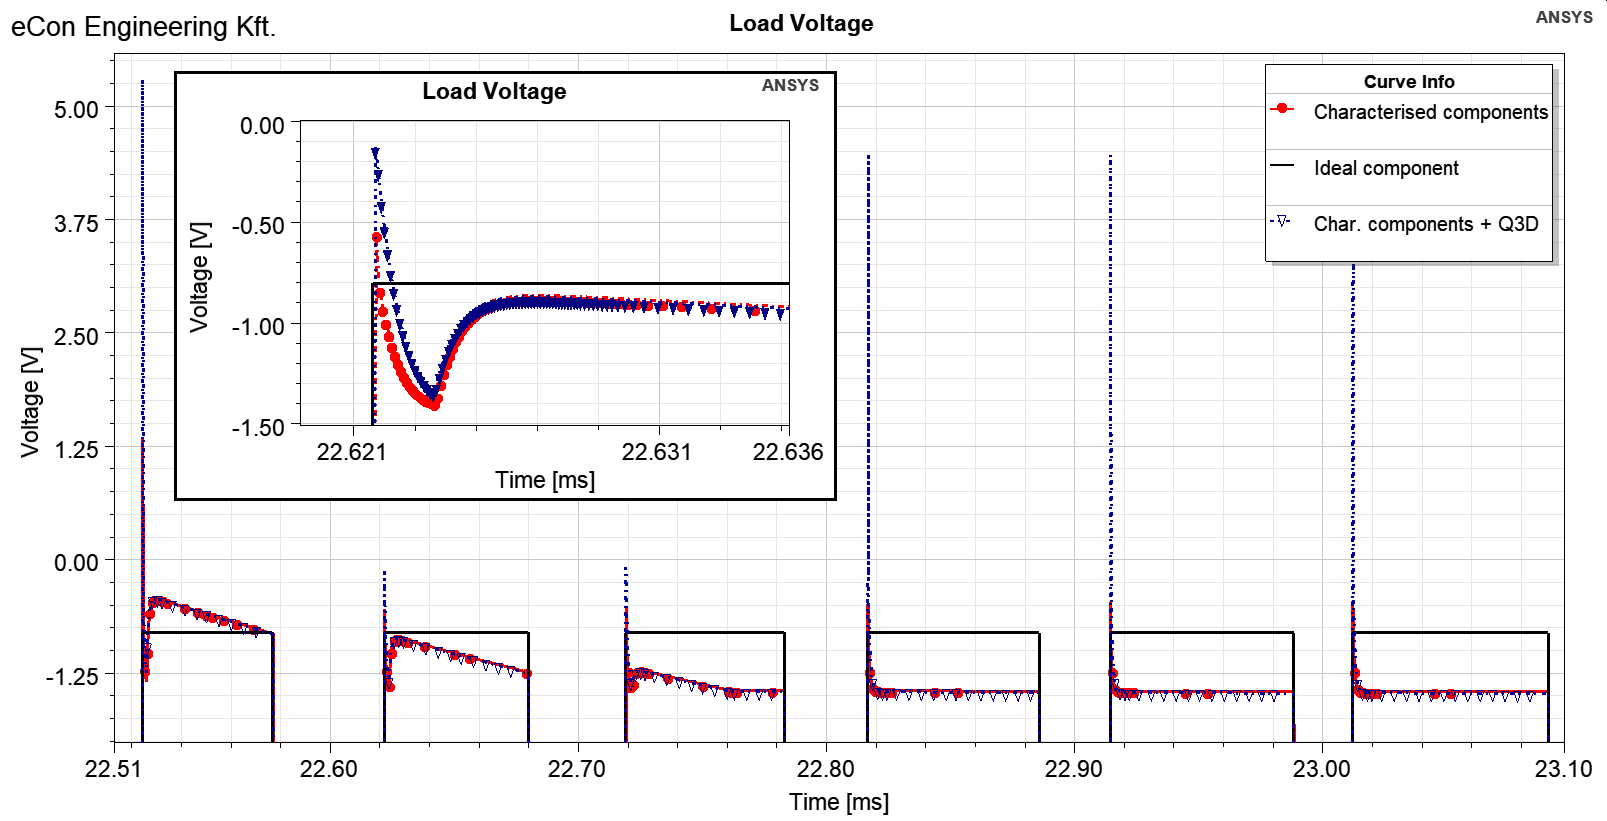 The voltage waveform of the RLC load for different level of models